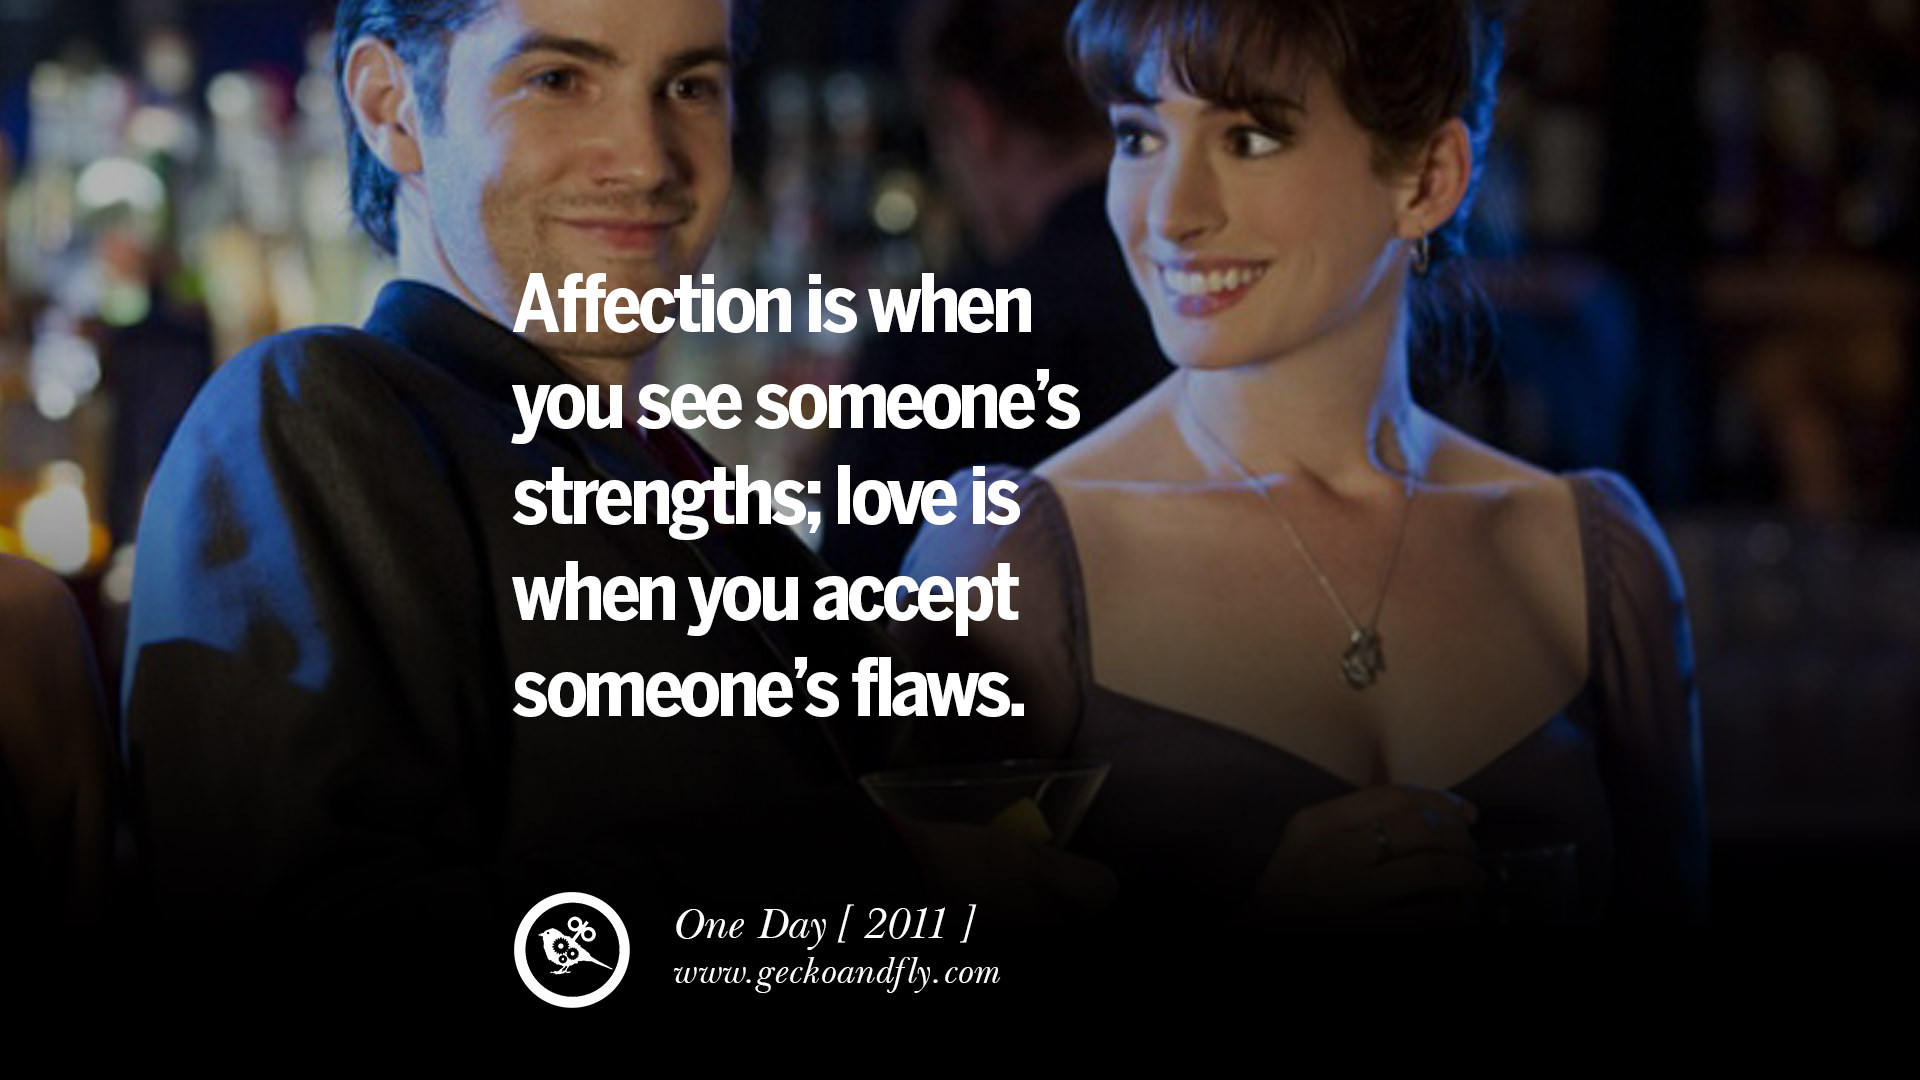 Life Movie Quotes
 20 Famous Movie Quotes on Love Life Relationship